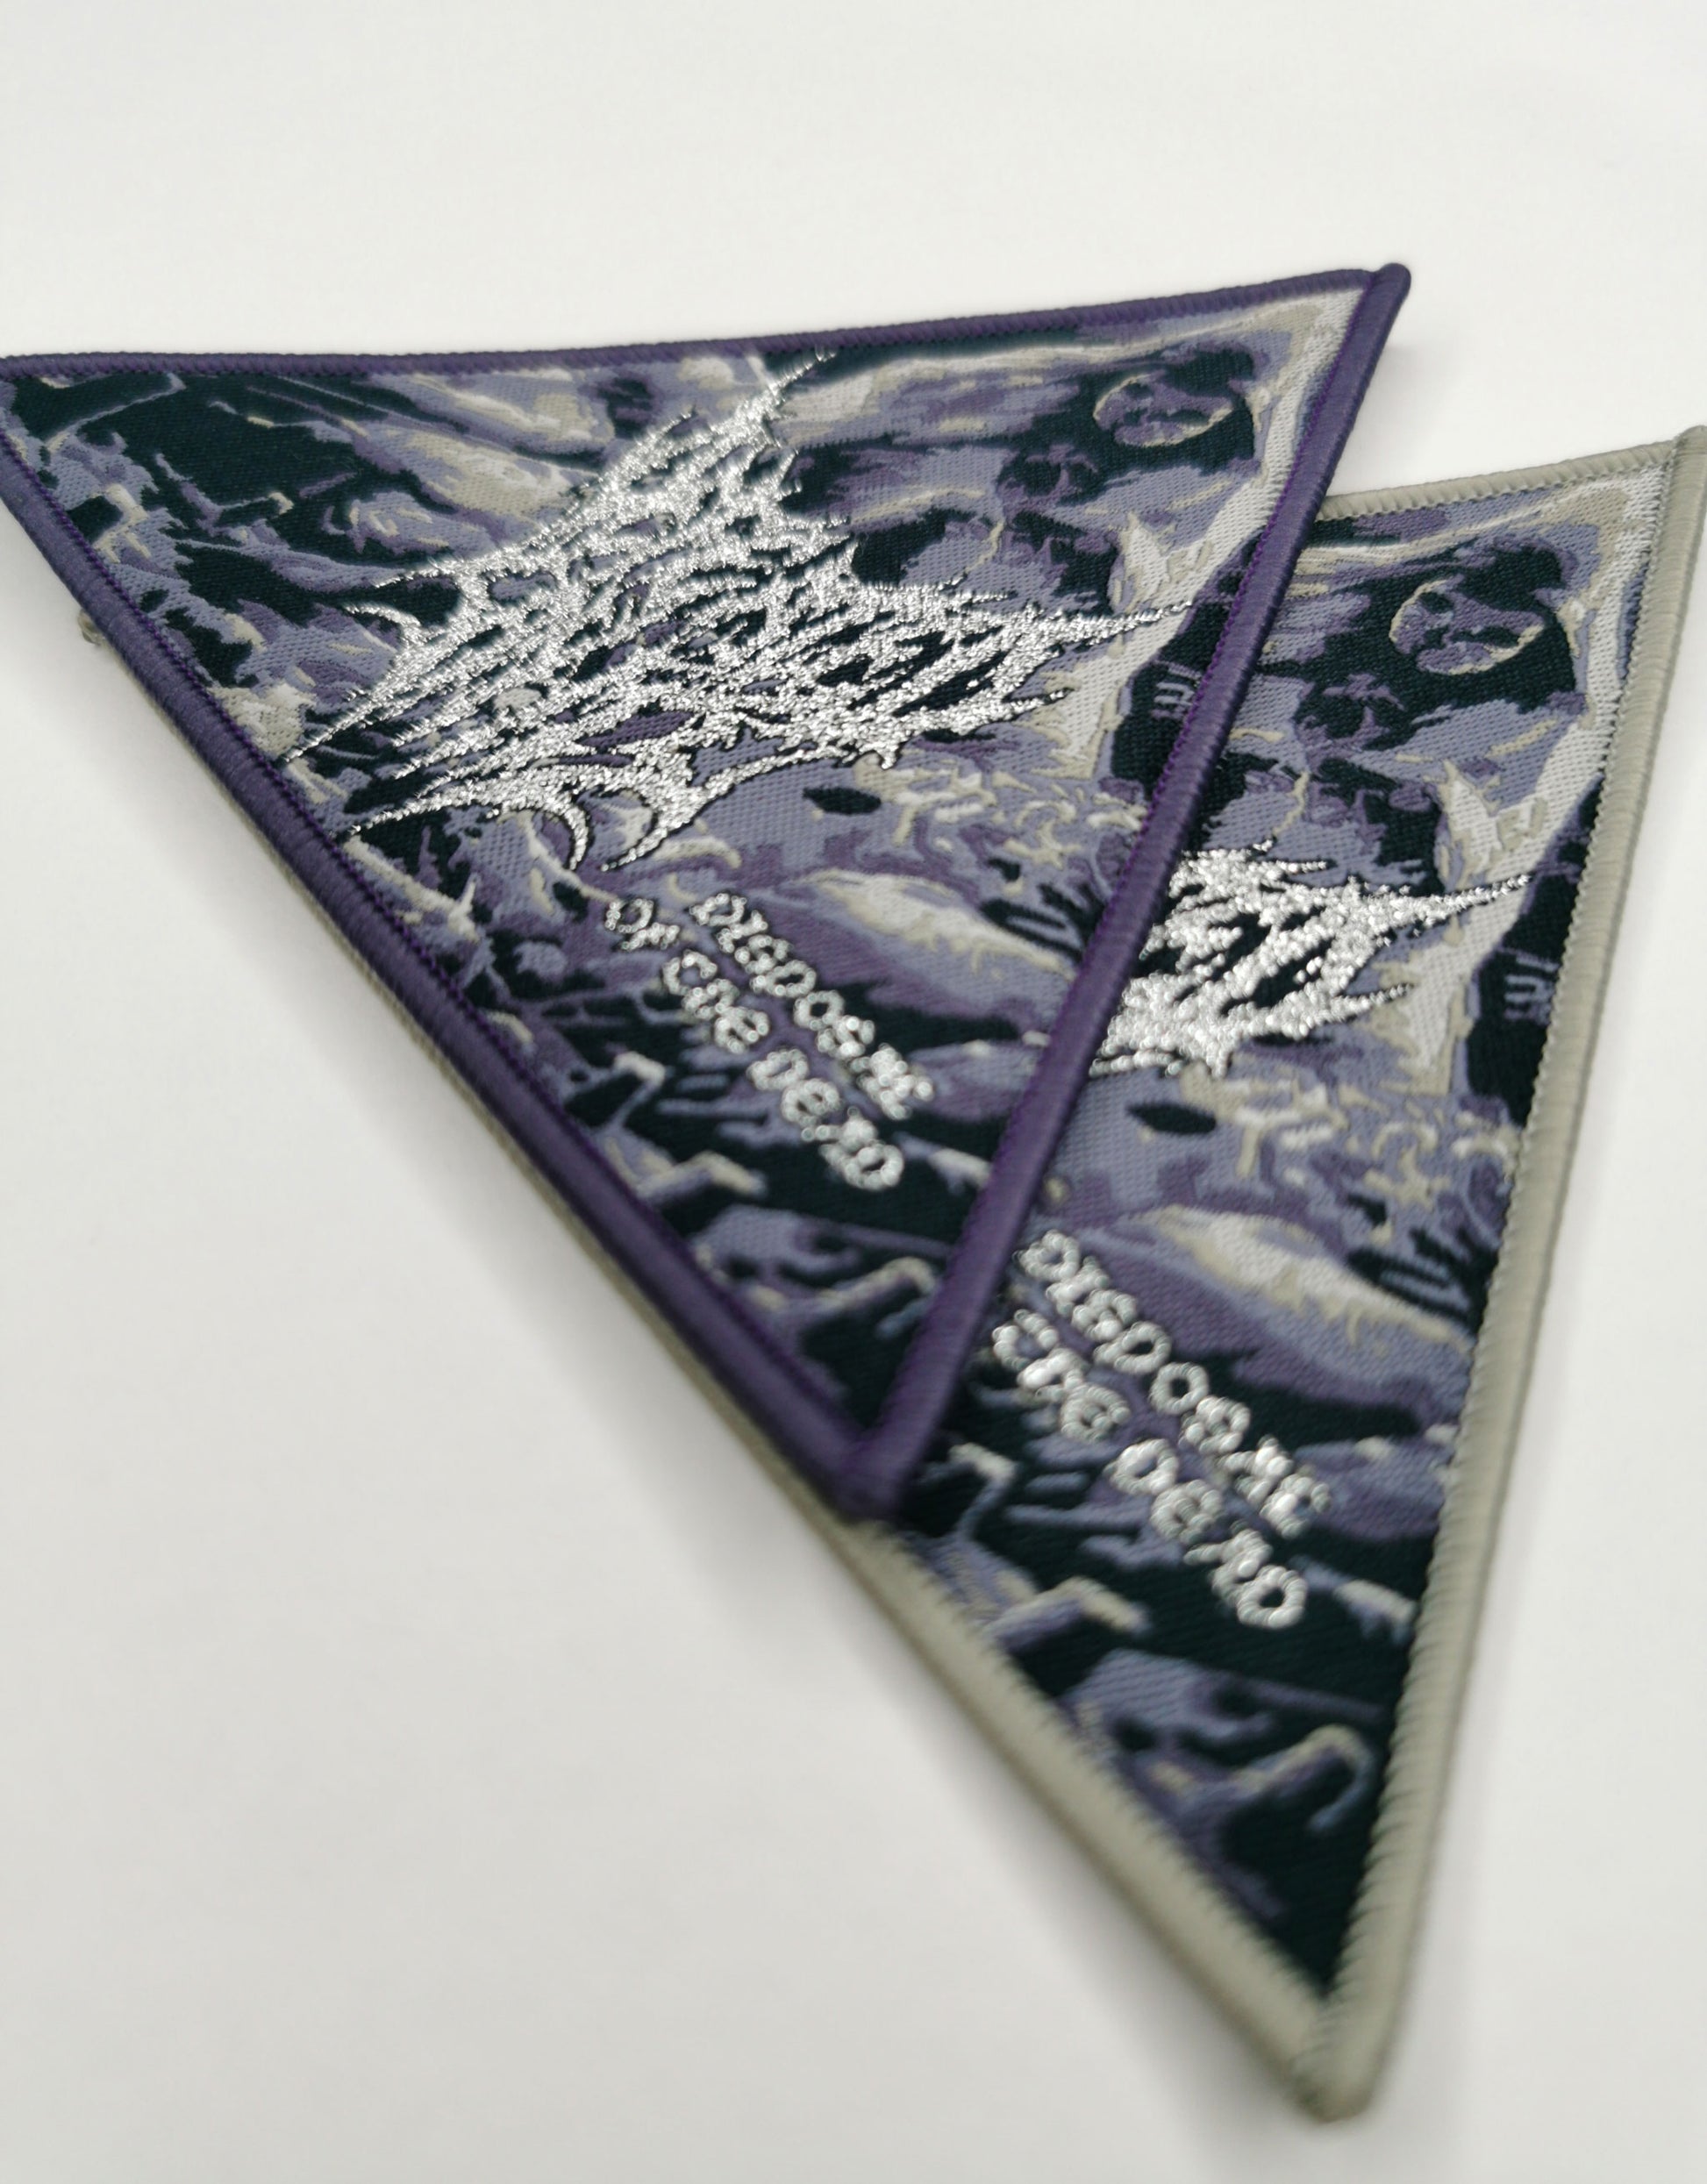 Temporal Dimensions Patches Defeated Sanity Disposal of the Dead Metal Woven Patches